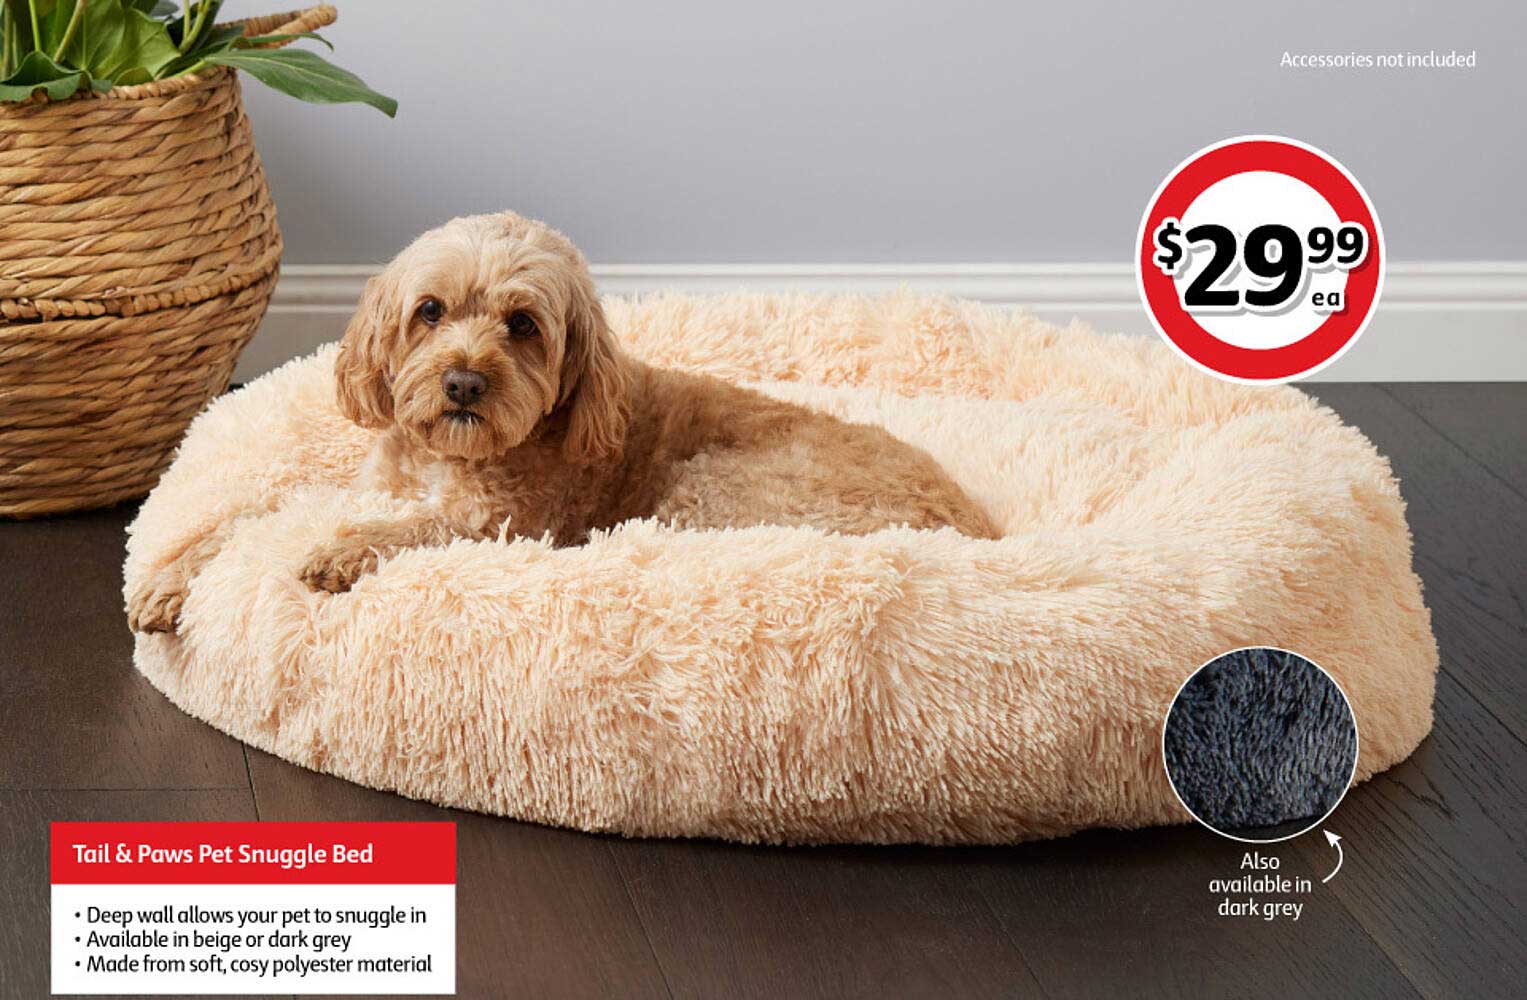 Coles Tail & Paws Pet Snuggle Bed